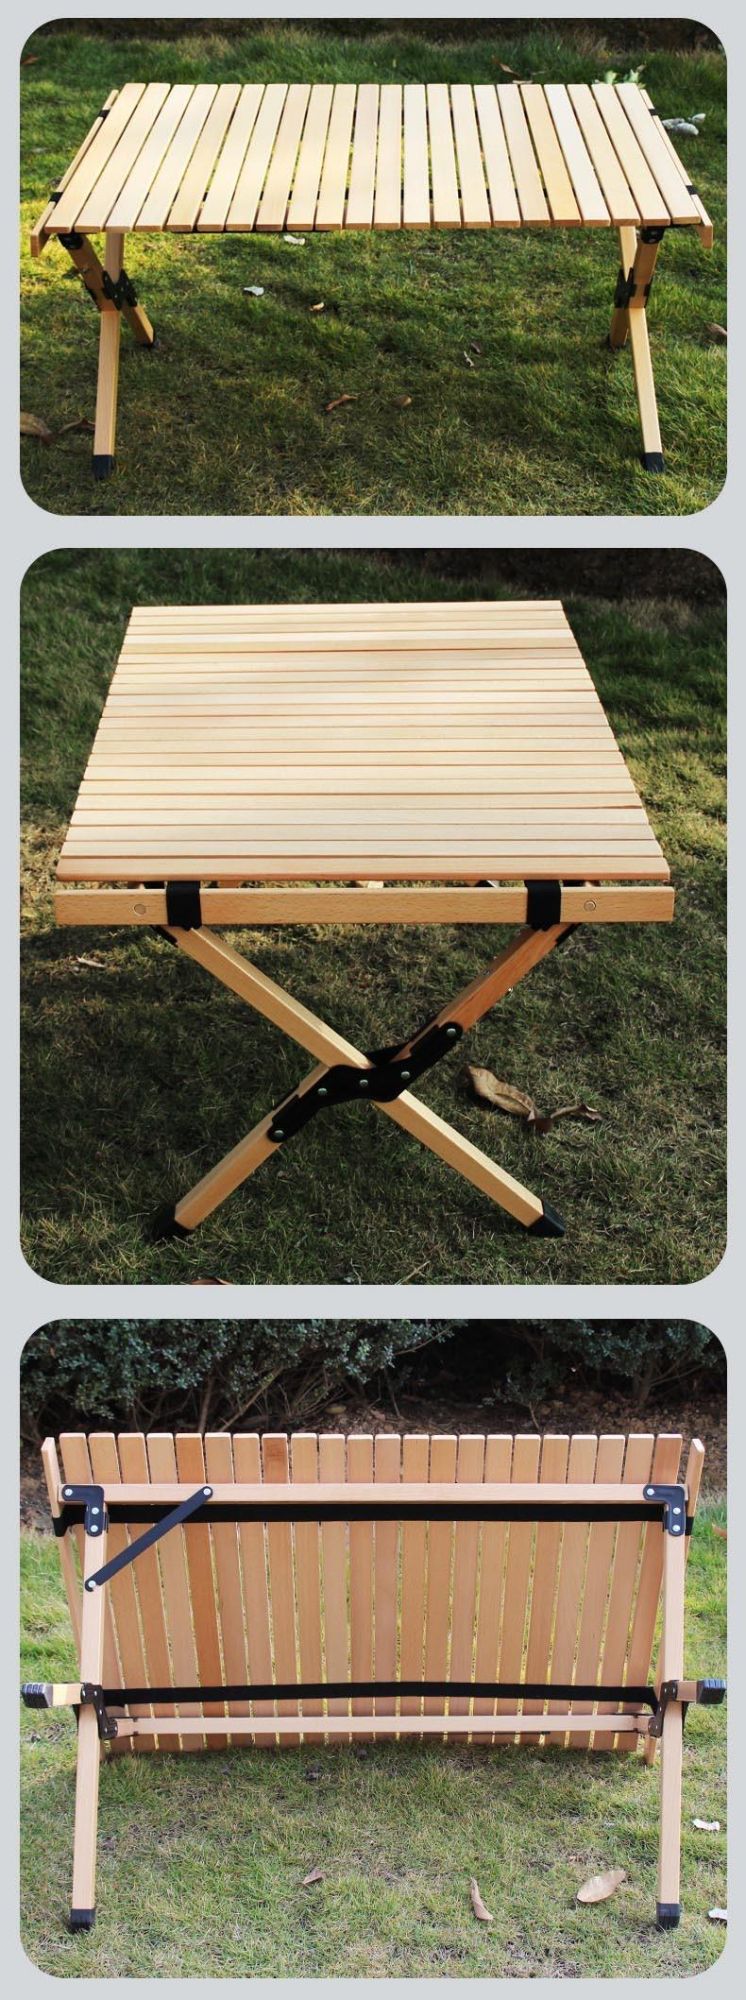 Outdoor Travel Hiking Portable Garden Folding Beach Wooden Camping Table Solid Wood Egg Roll Table